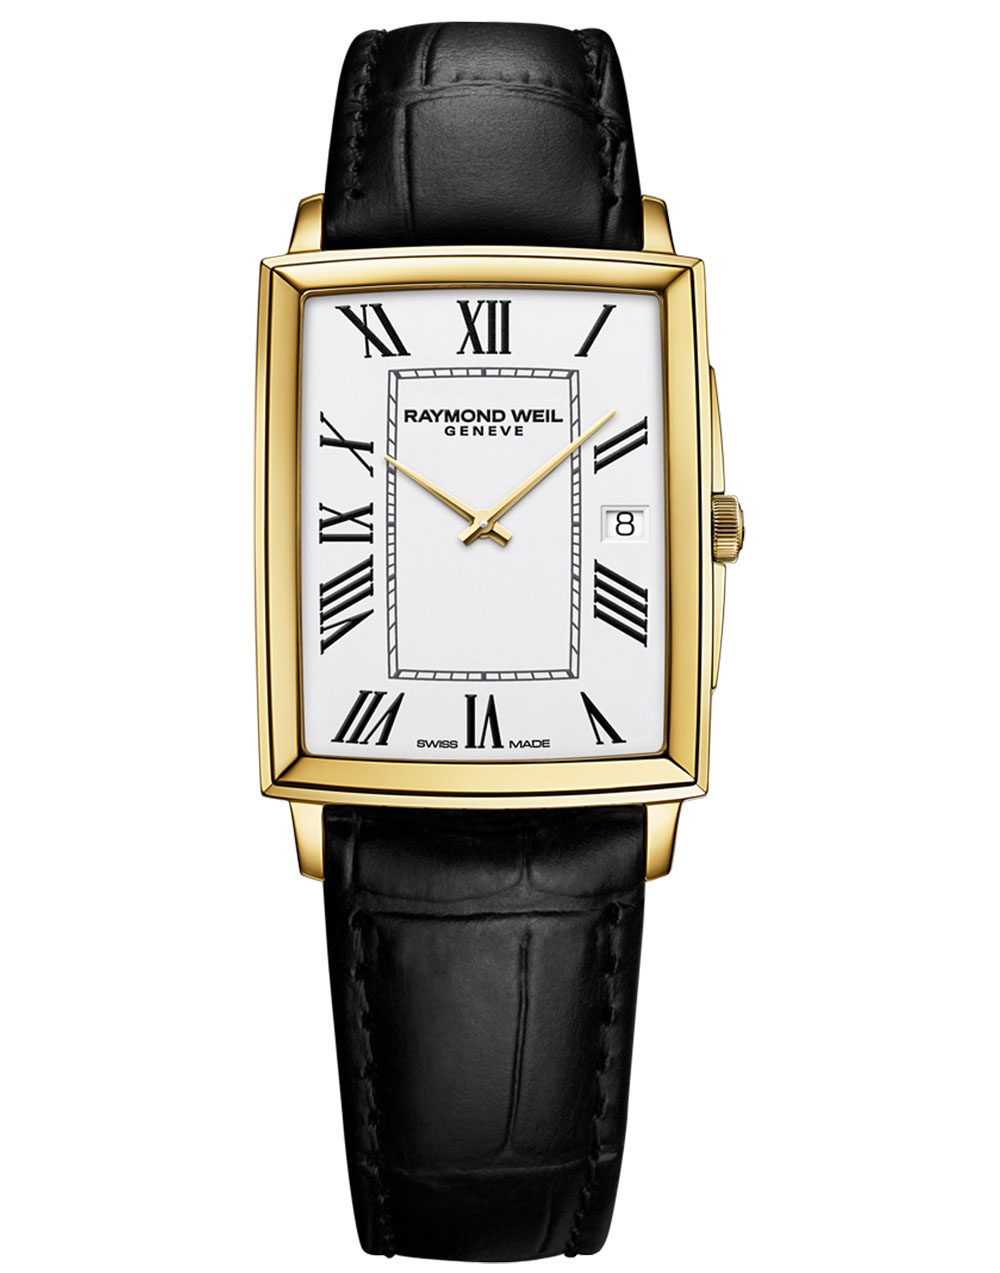 Toccata Men’s Classic Rectangular Gold PVD White Dial Leather Watch, 37 x 29 mm